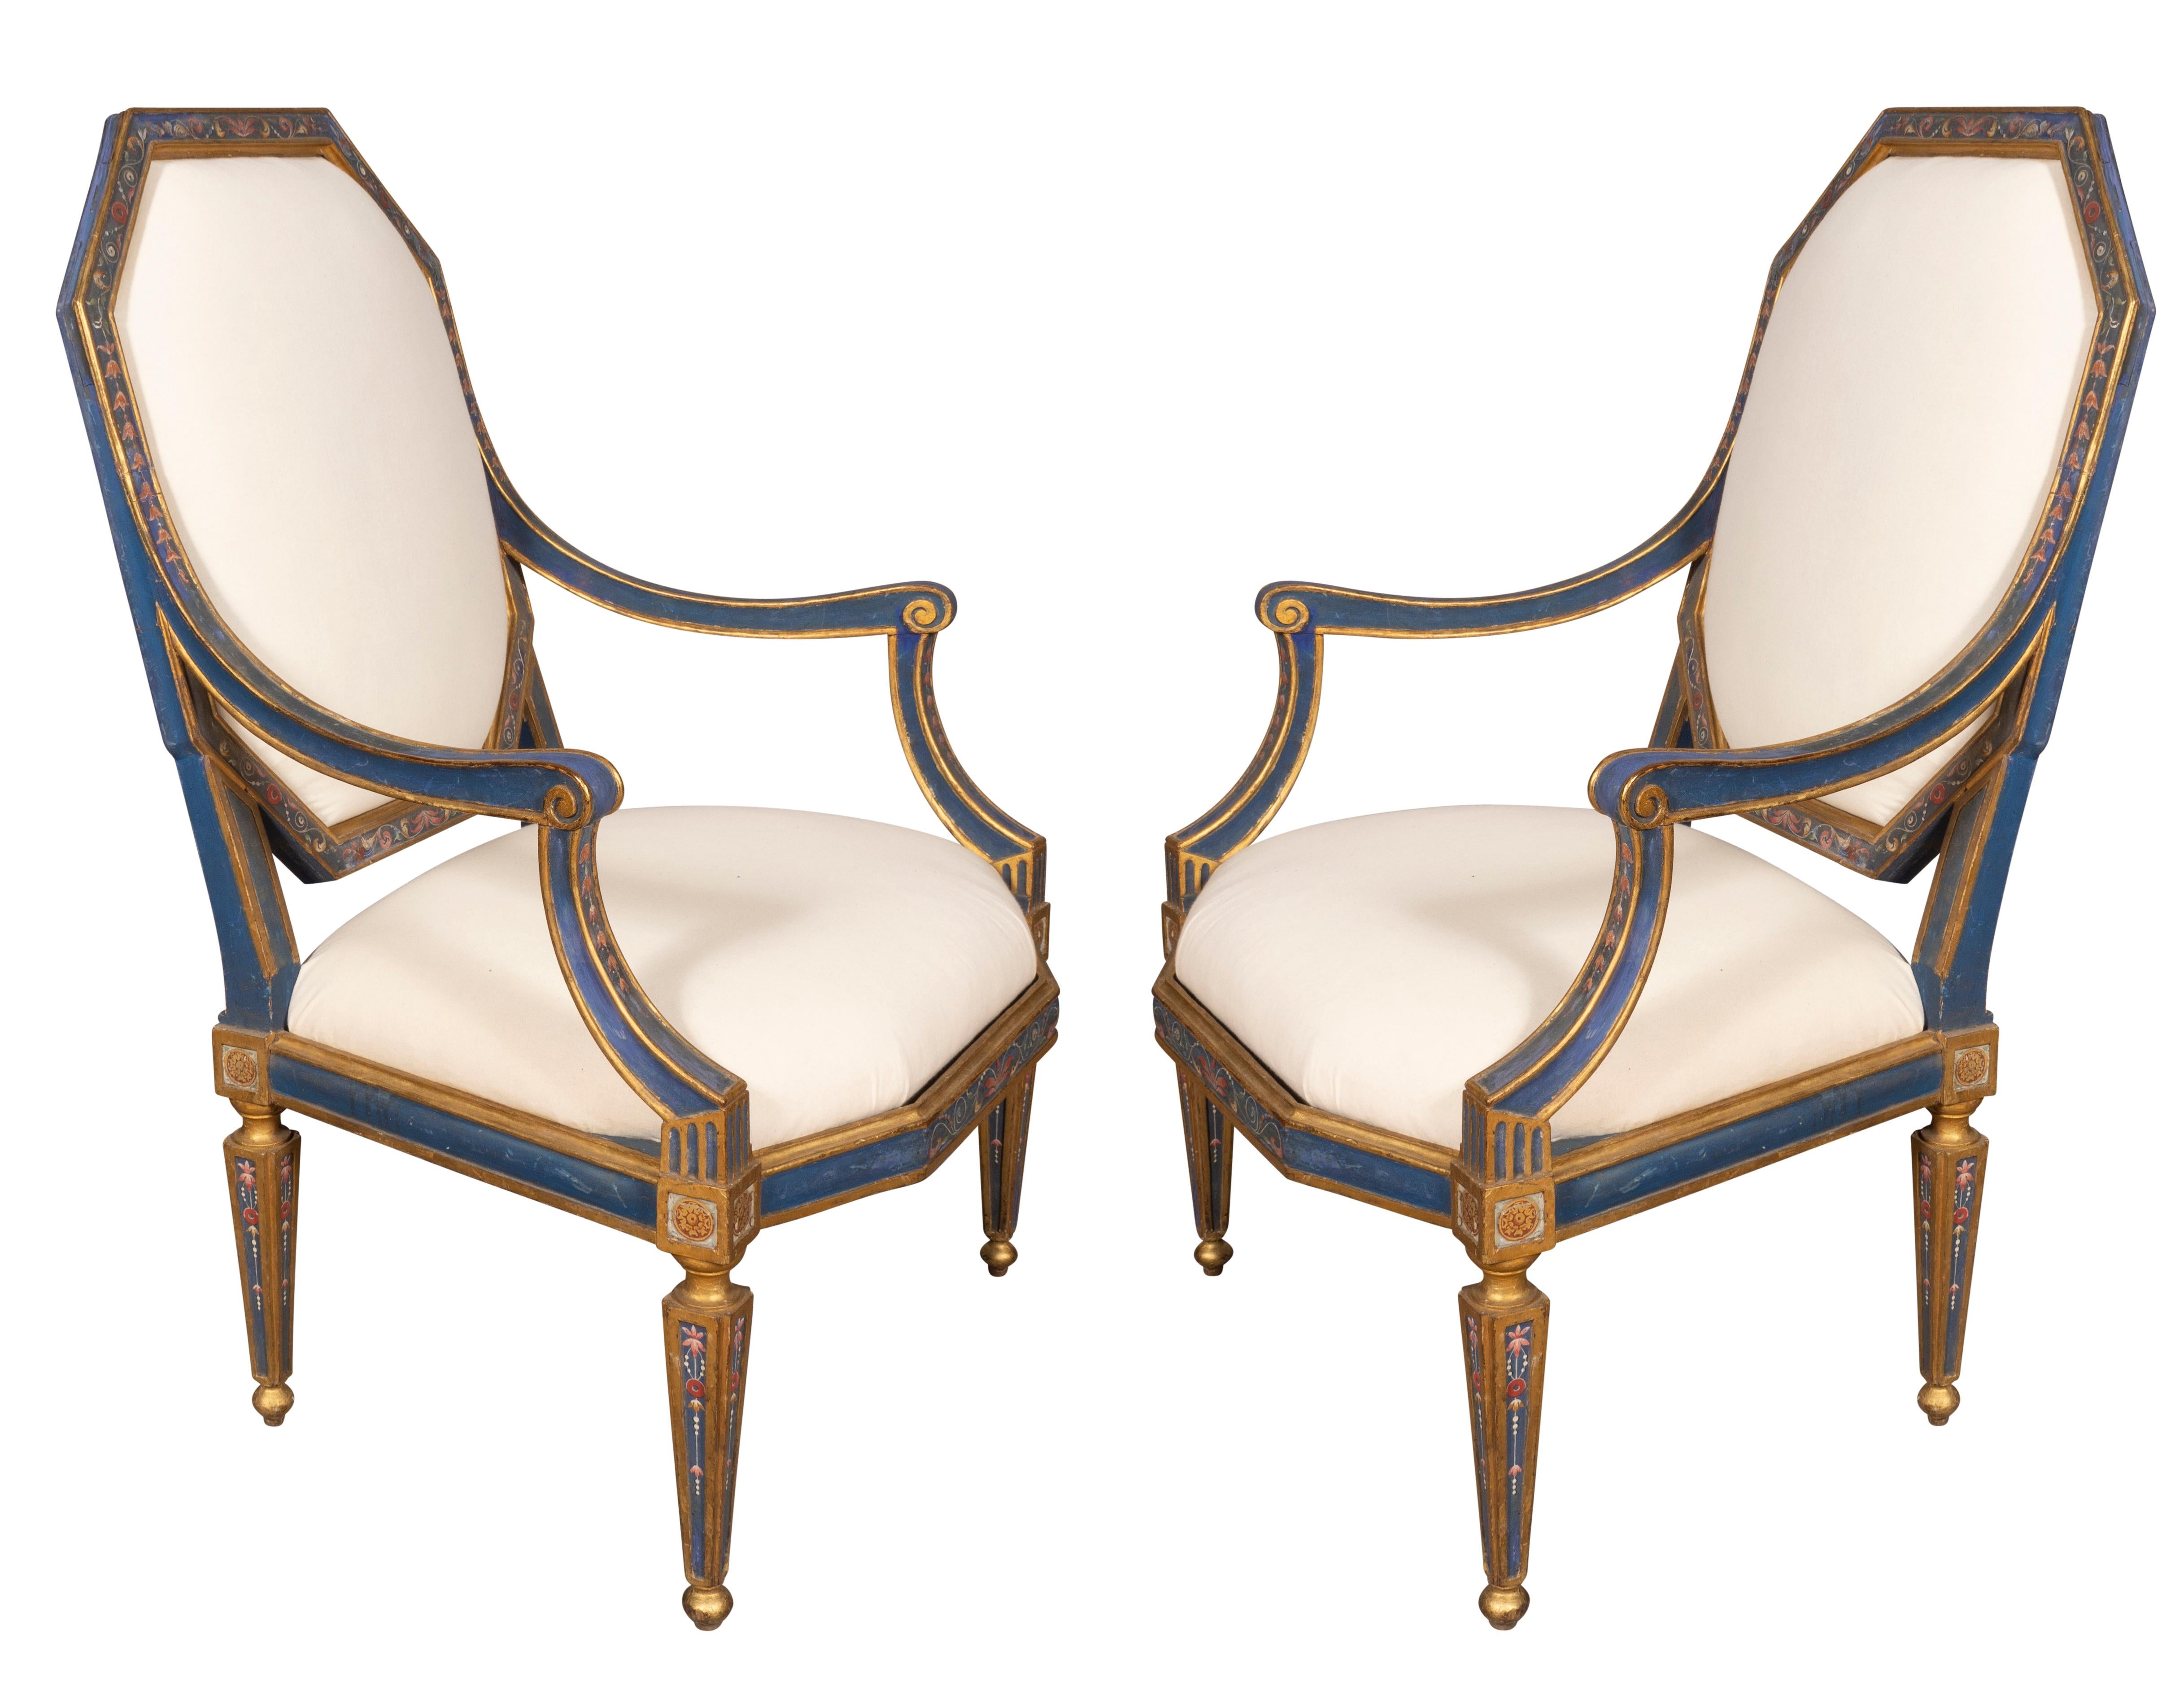 A fine pair of chairs with unusual shaped backs and seats. With blue paint, gilding and Etruscan painted decoration. Raised on square tapered legs. Very generous scale and very sturdy. With original paint and newly upholstered removable seats.